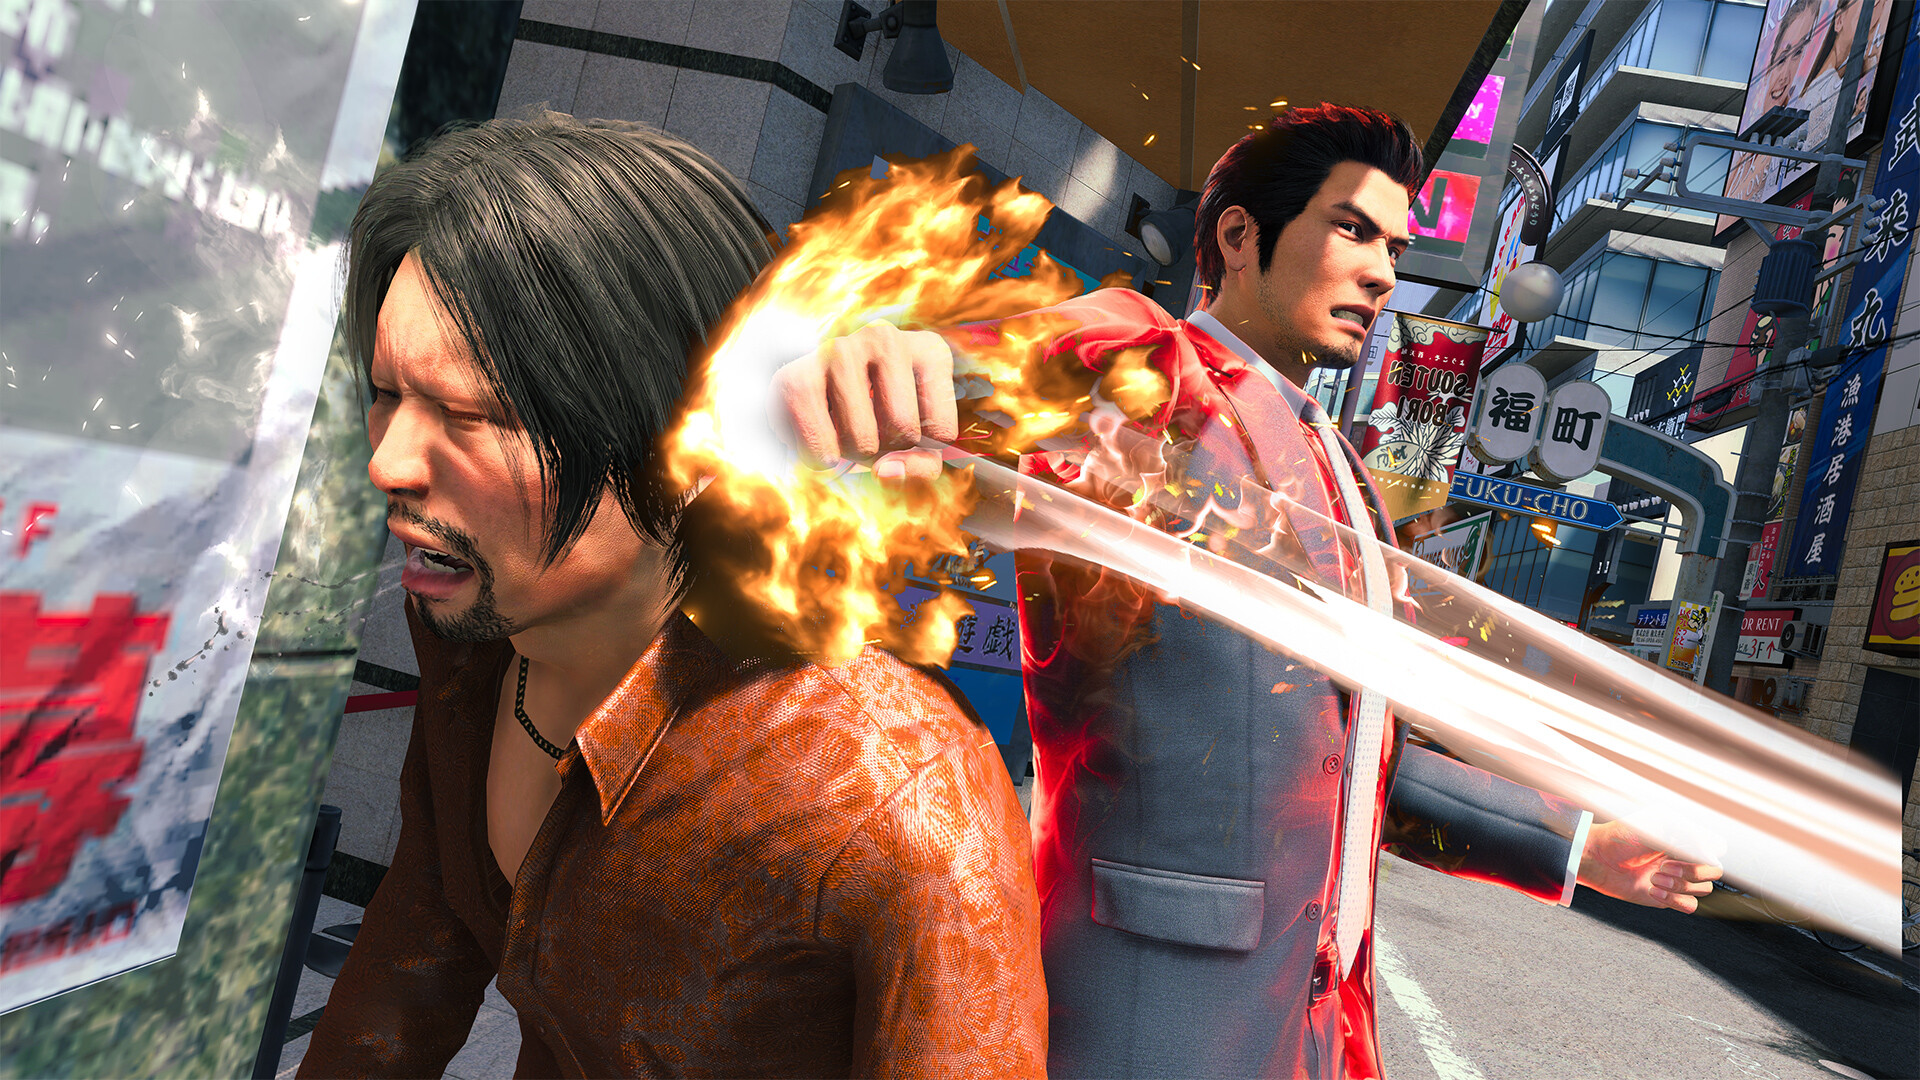 Kiryu strikes an enemy with a fire punch attack